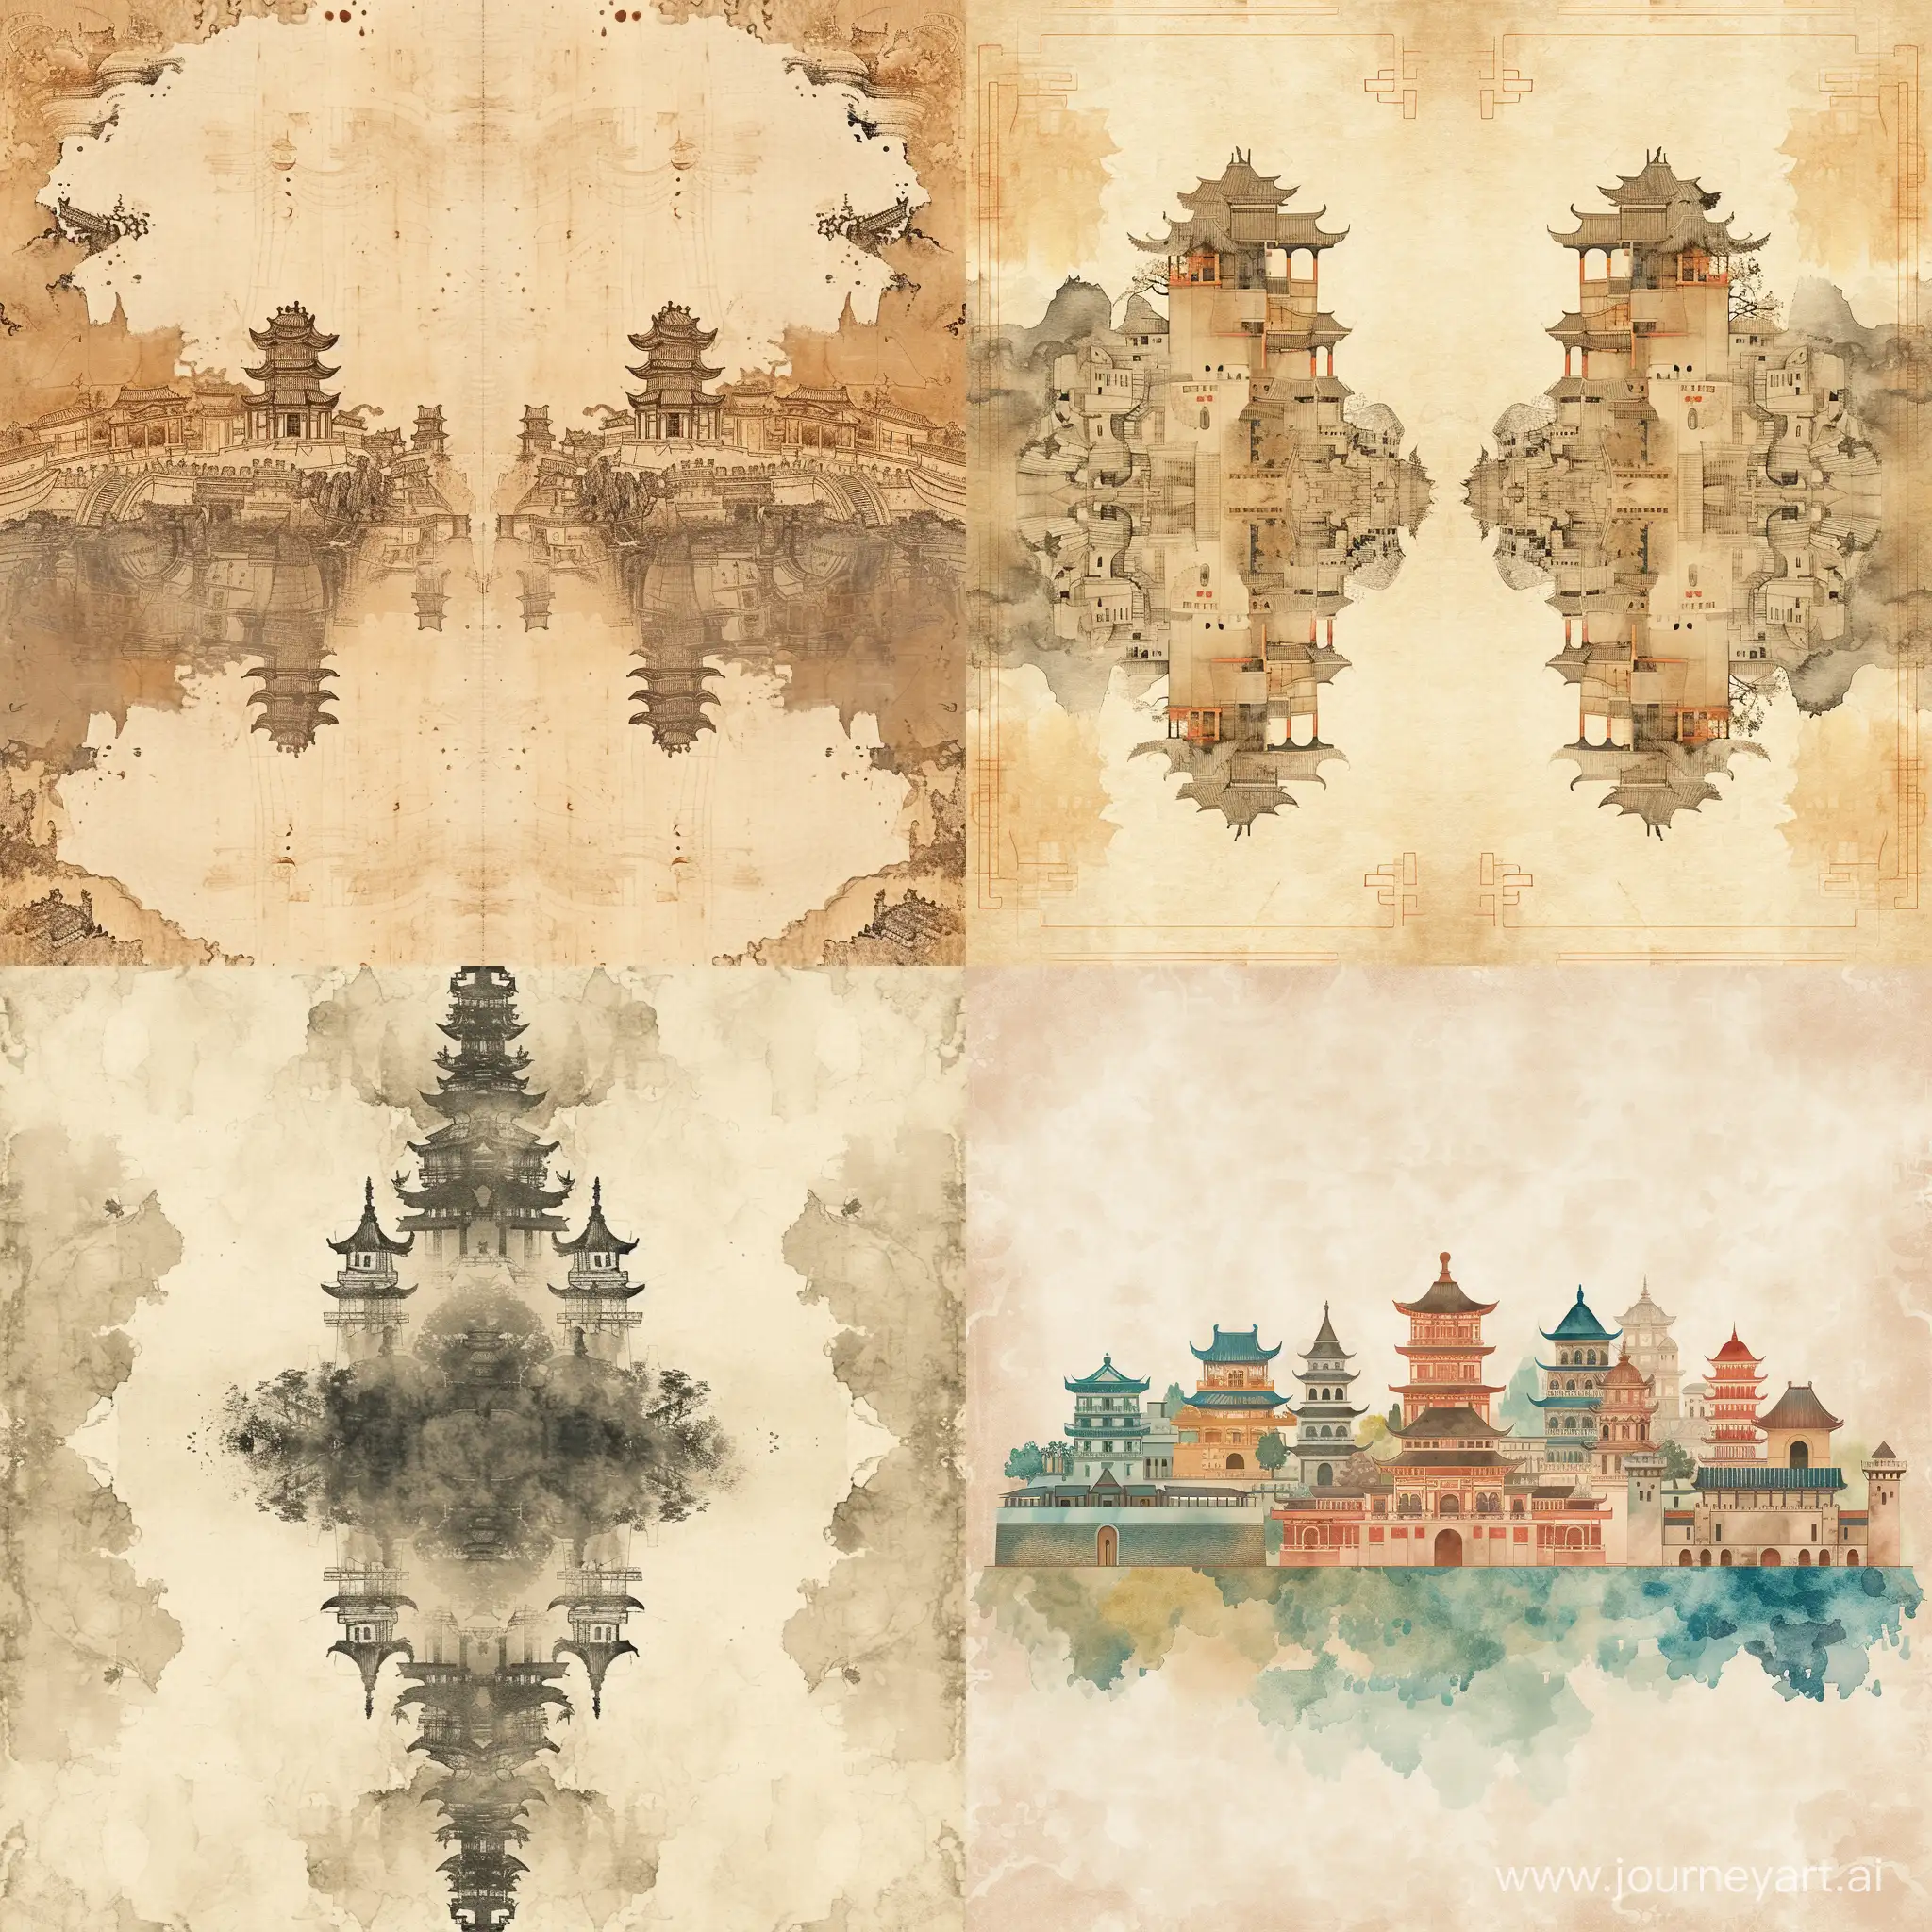 Antique-Paper-with-Ancient-City-Elements-in-Symmetrical-Watercolor-Caricature